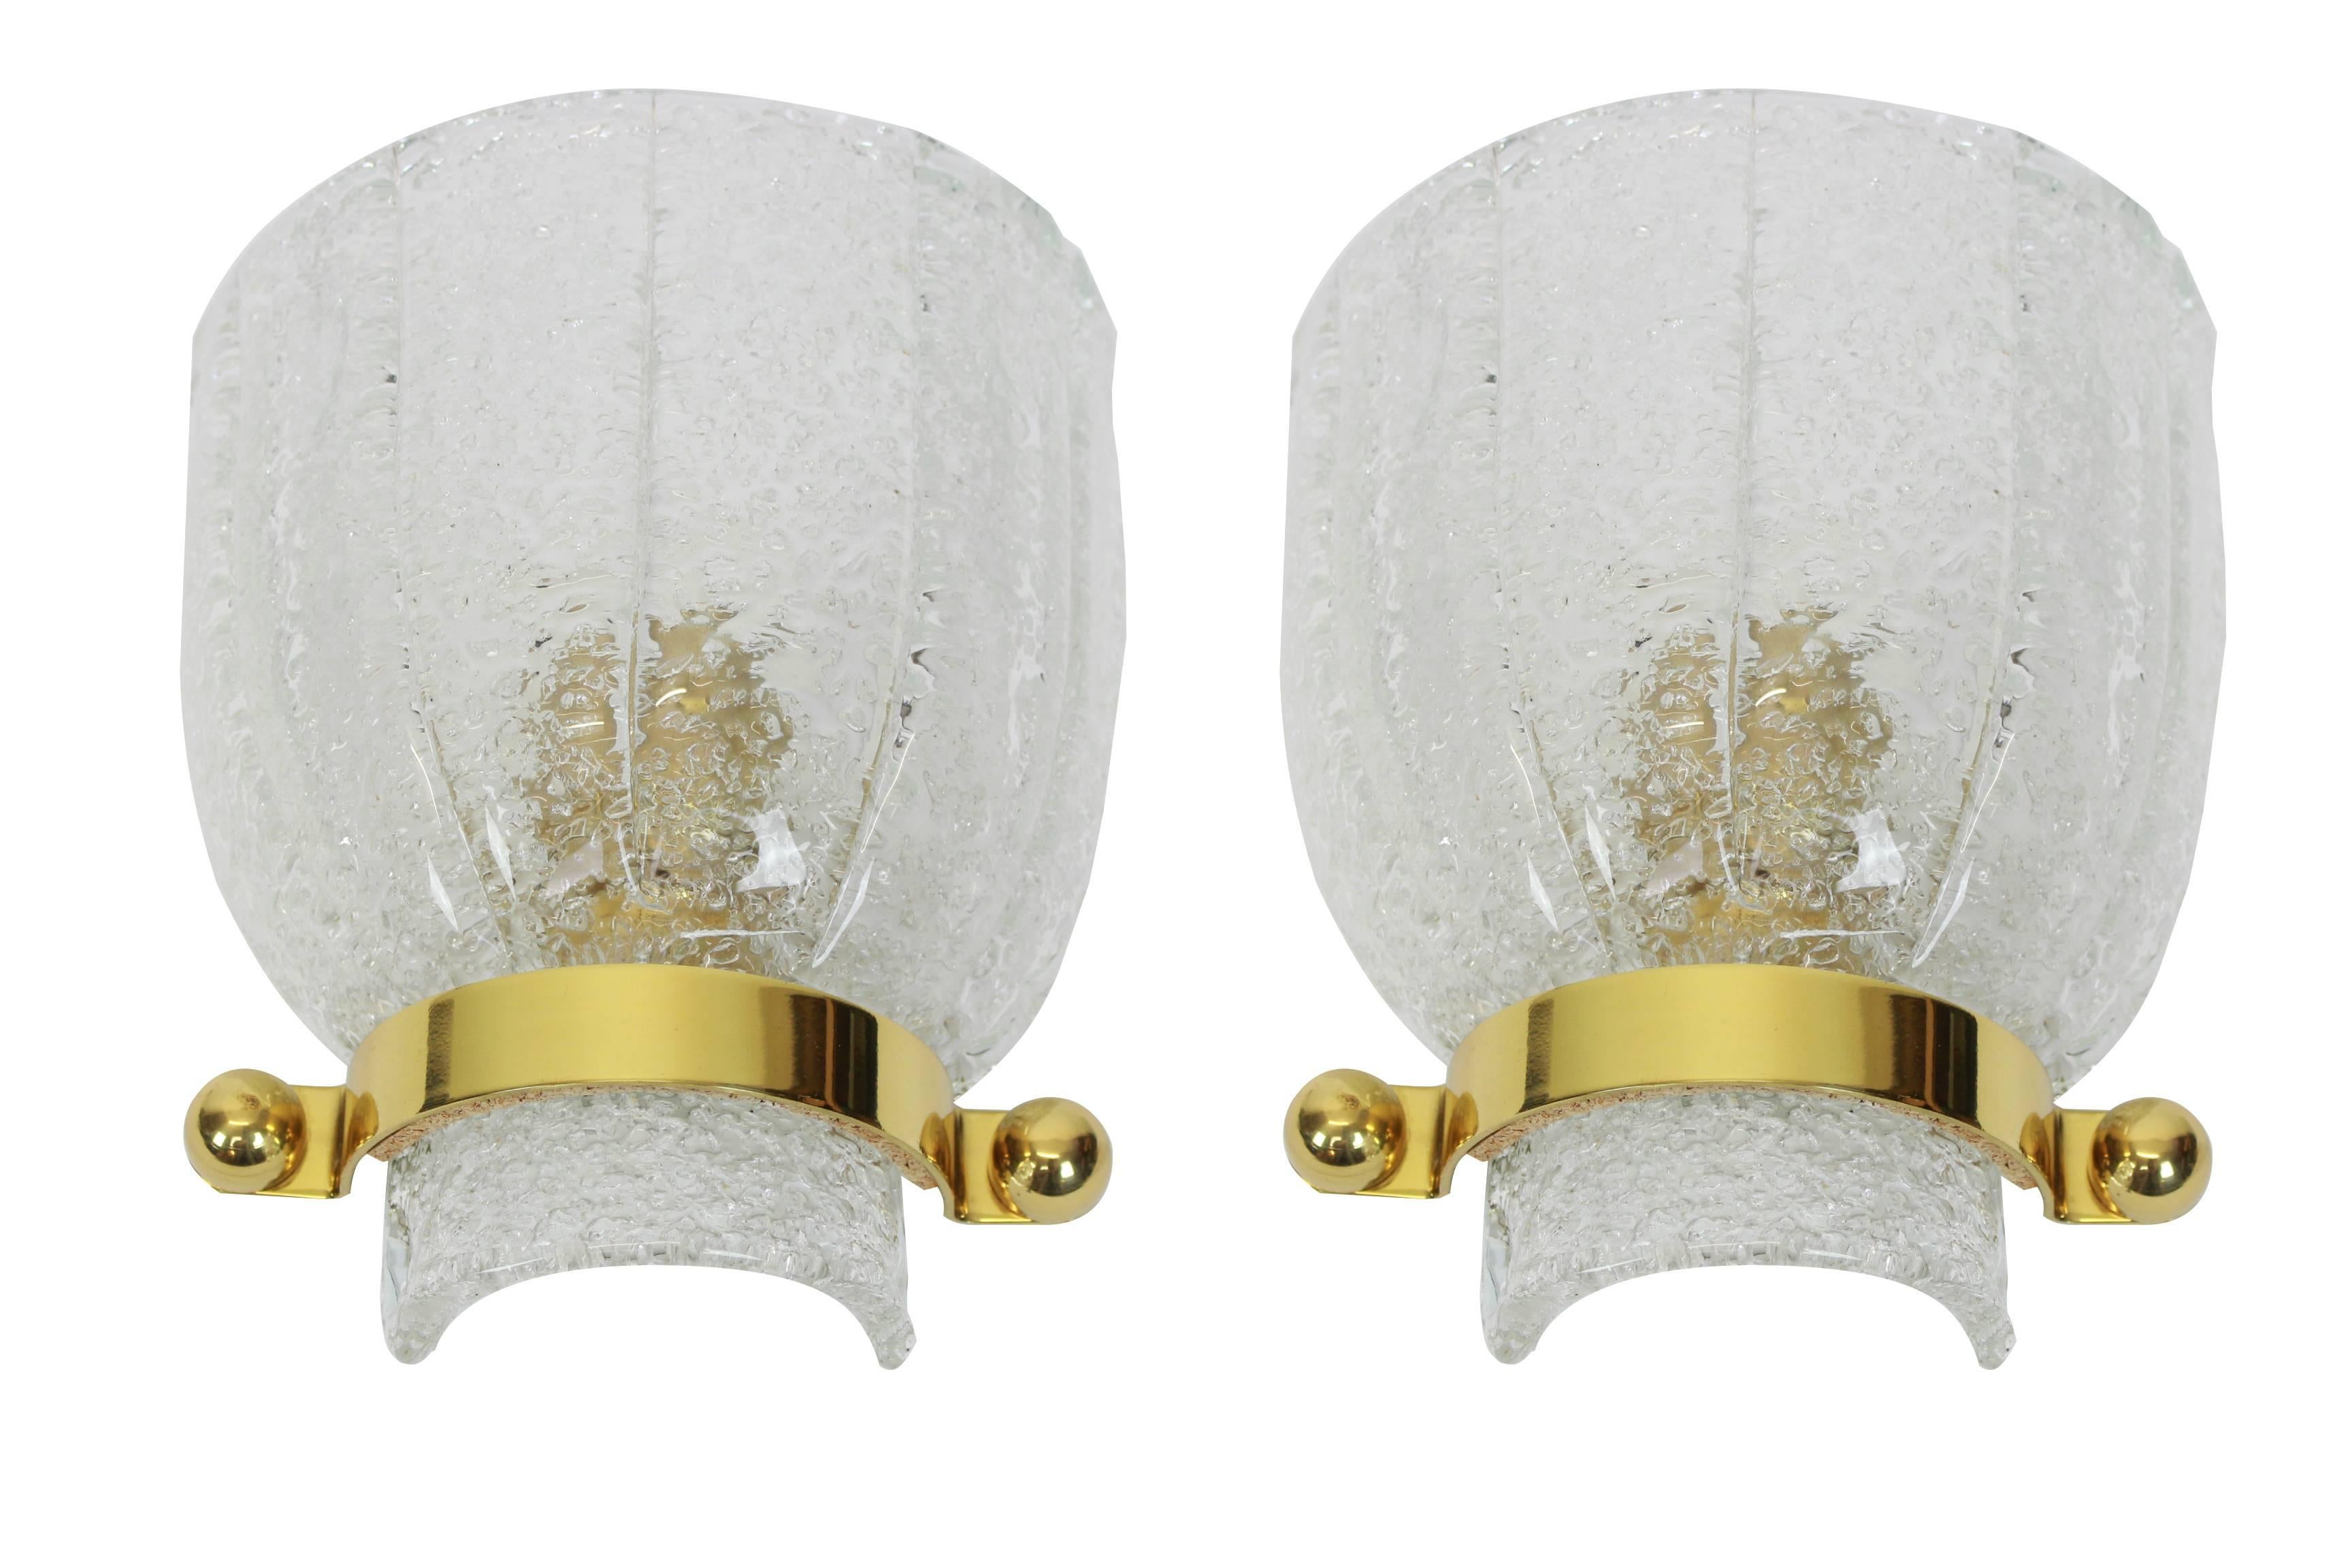 Wonderful pair of midcentury brass wall sconces with Murano glass, made by Hillebrand, Germany, circa 1960-1969.

High quality and in very good condition. Cleaned, well-wired and ready to use. 

Each fixture requires 1 x E14 standard bulb and is